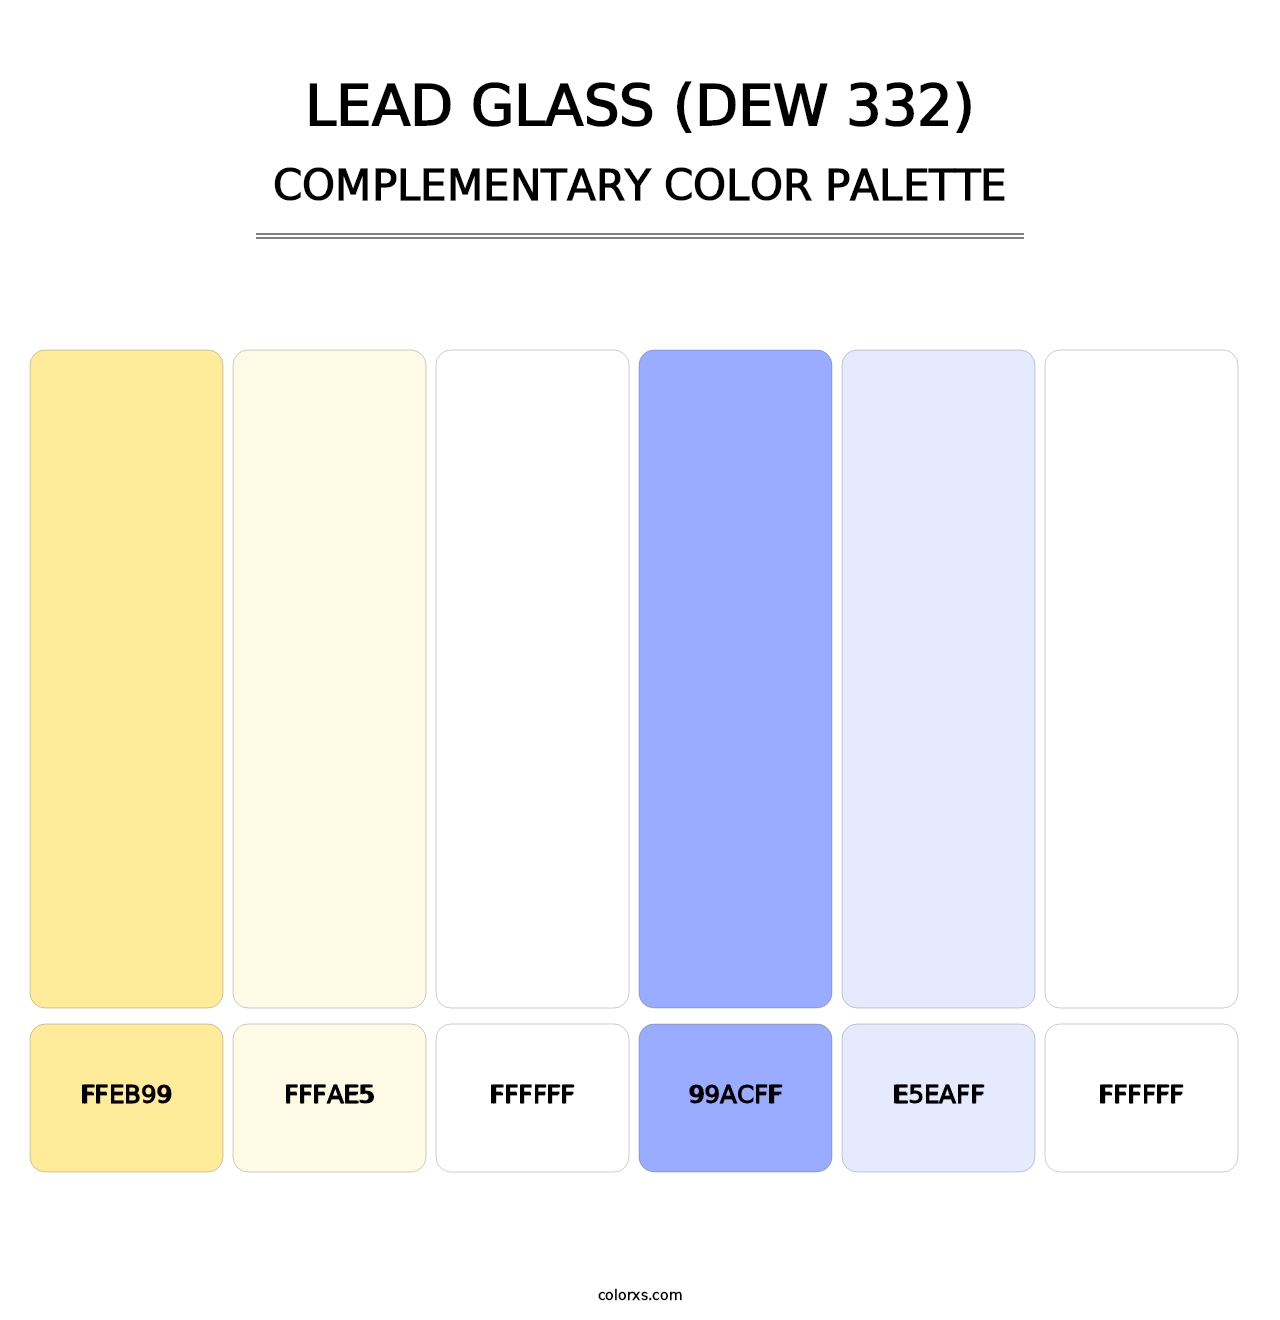 Lead Glass (DEW 332) - Complementary Color Palette